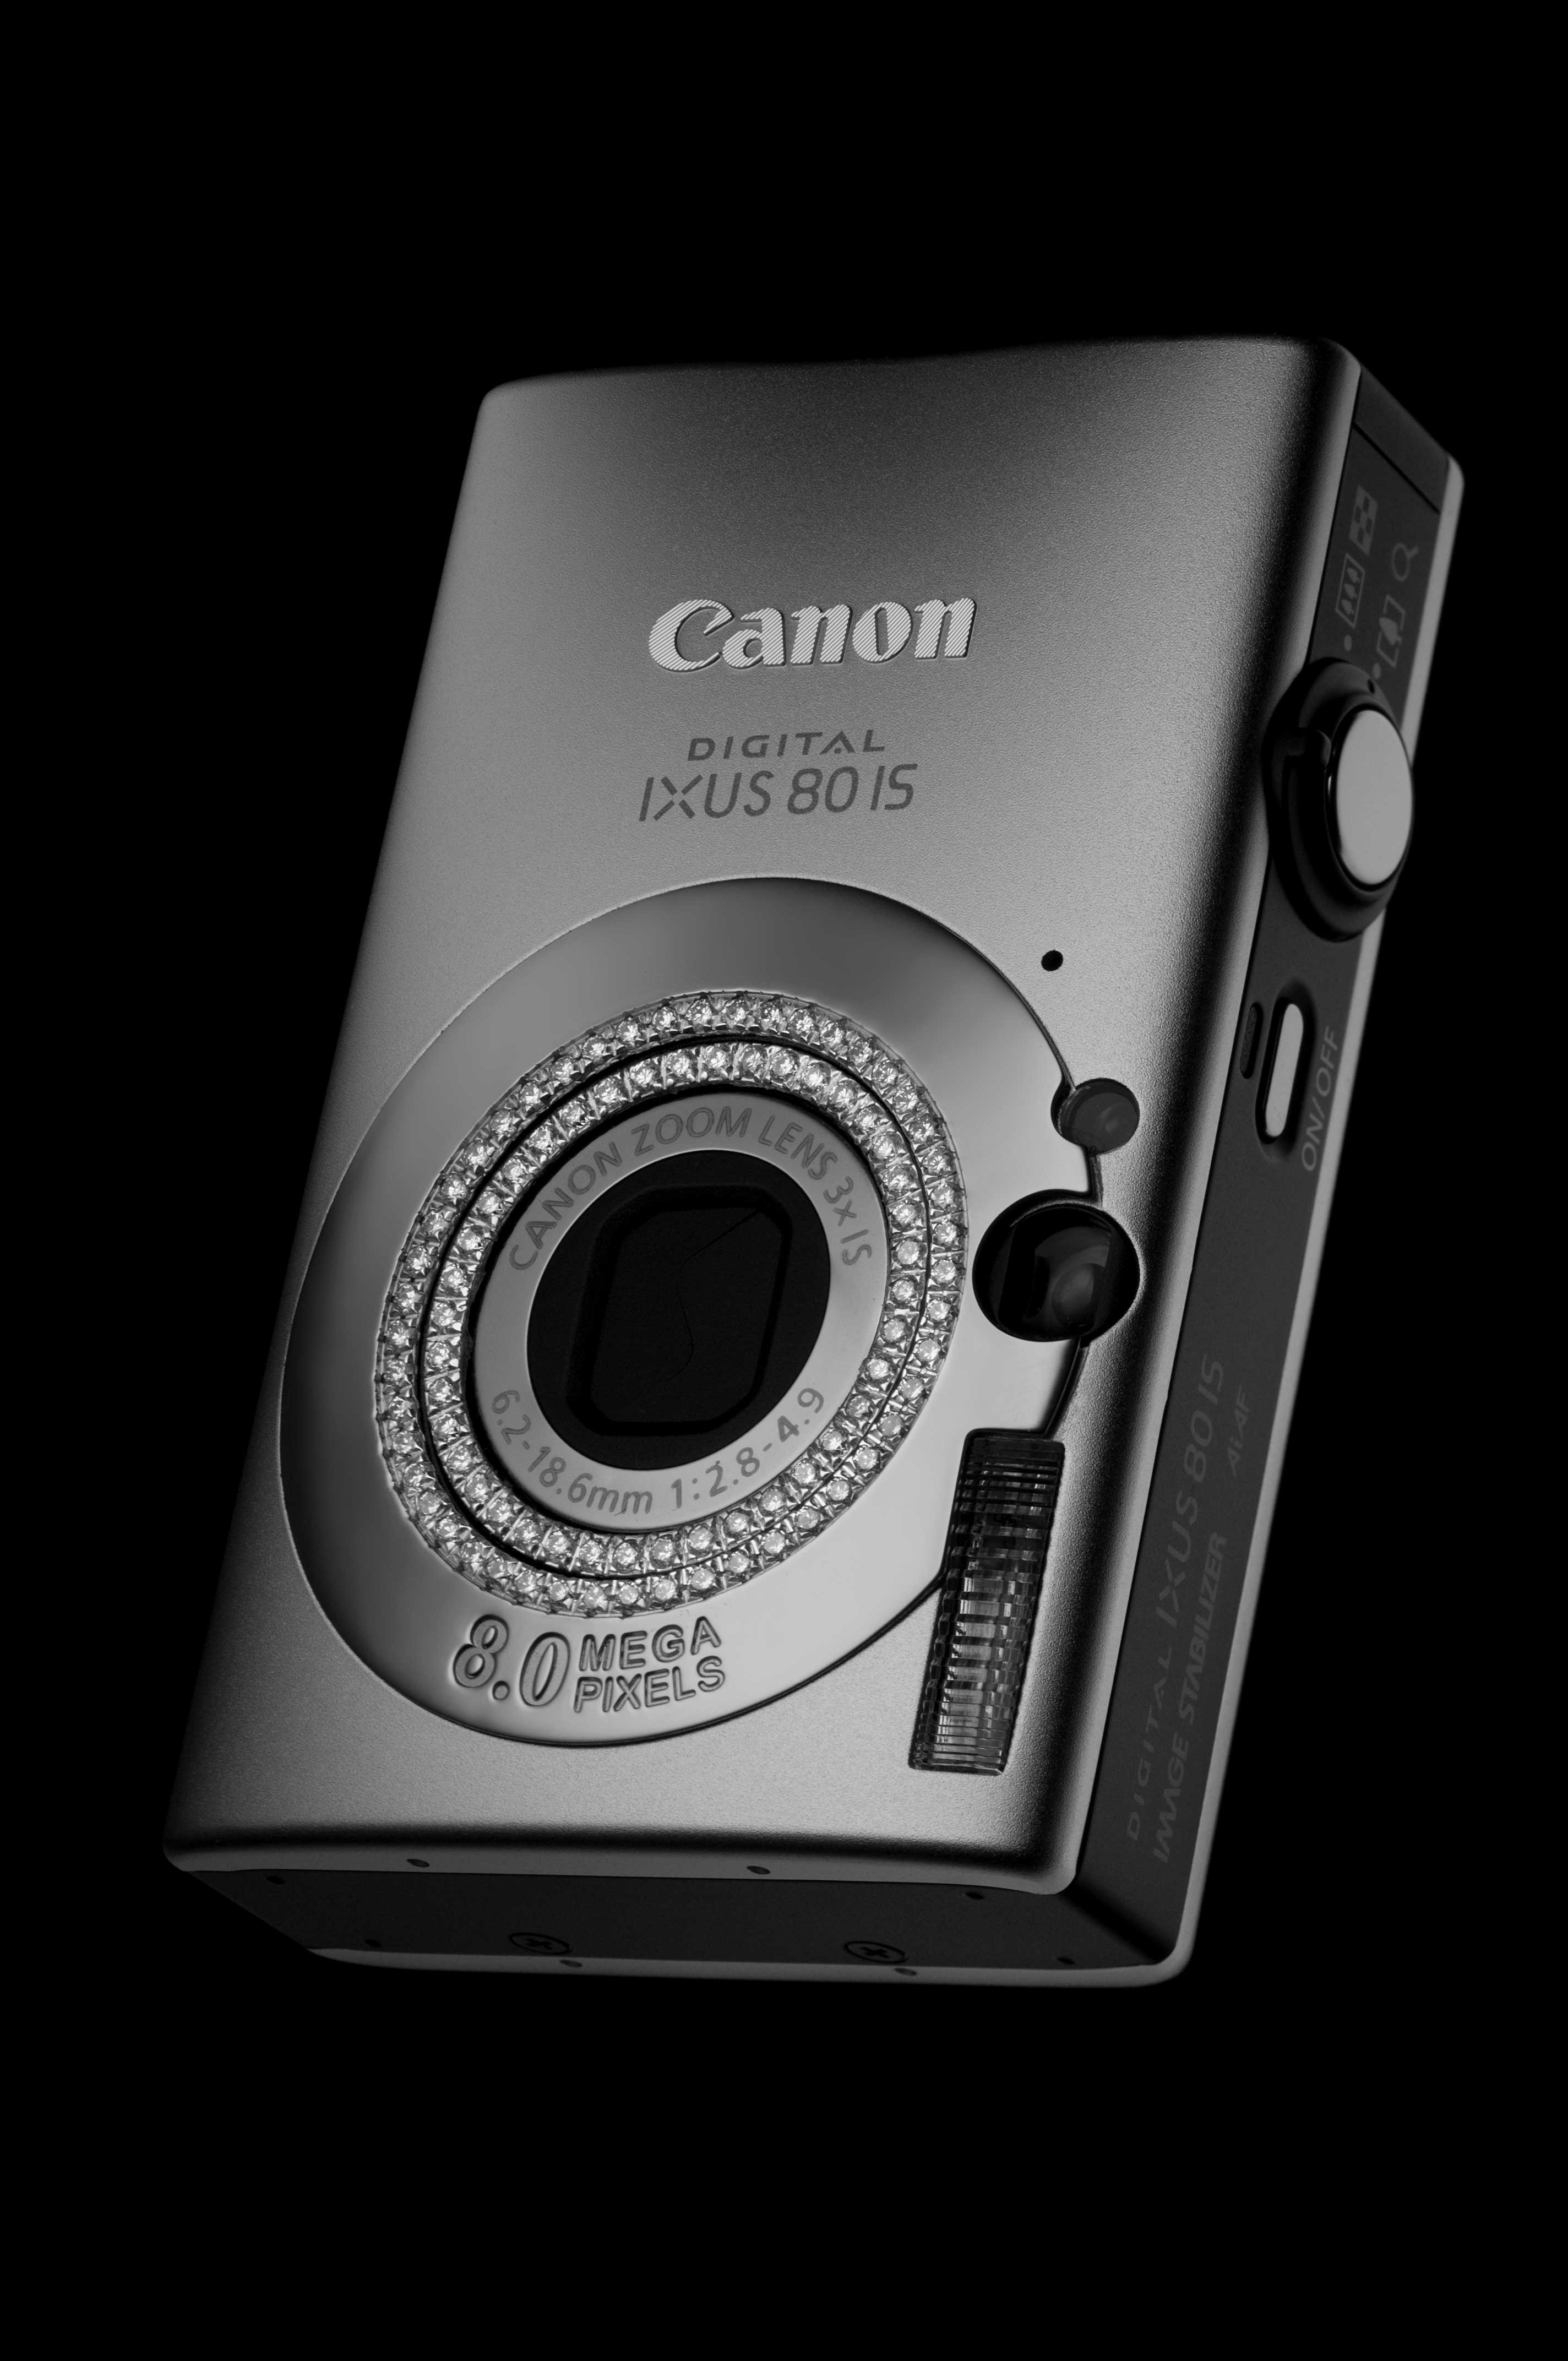 Product photography of a camera on a black background